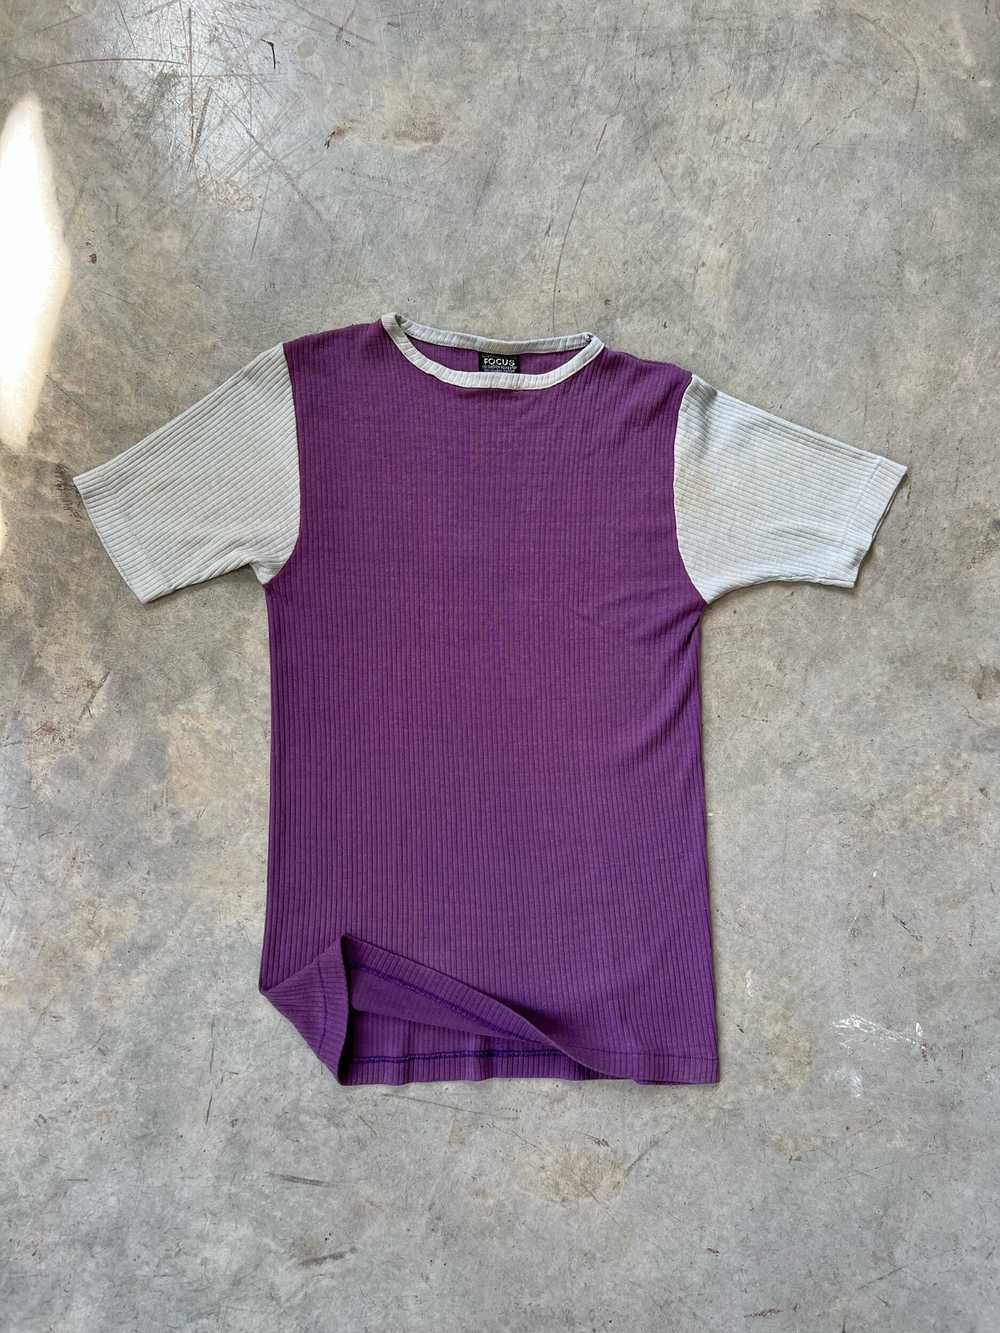 80s Ribbed Colorblock Tee, Size XS - image 3